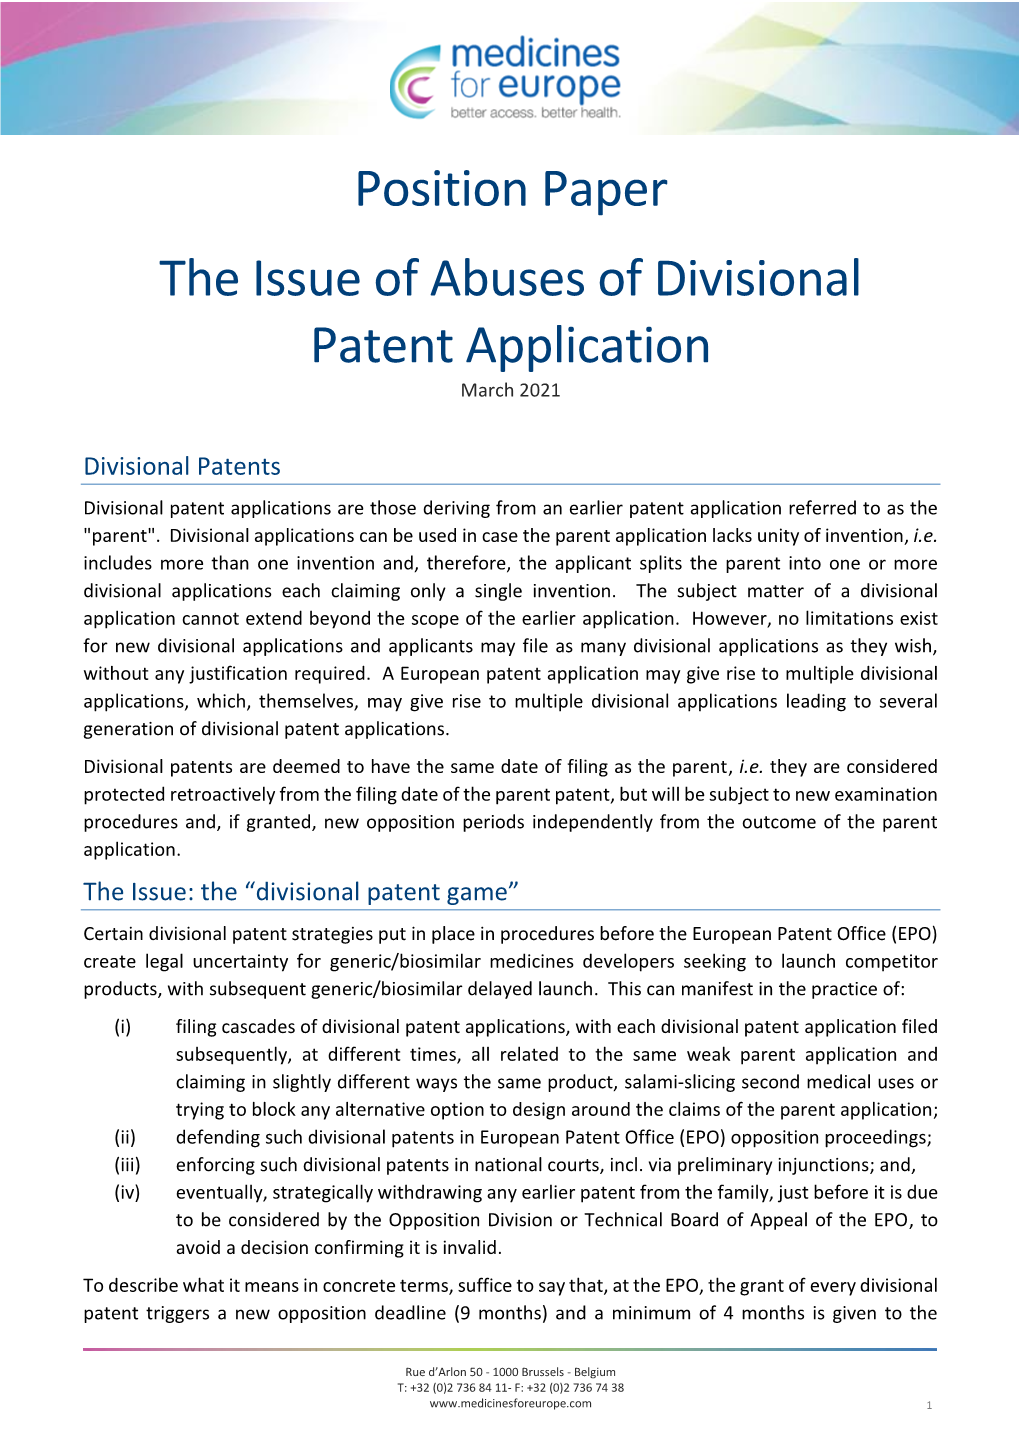 Position Paper the Issue of Abuses of Divisional Patent Application